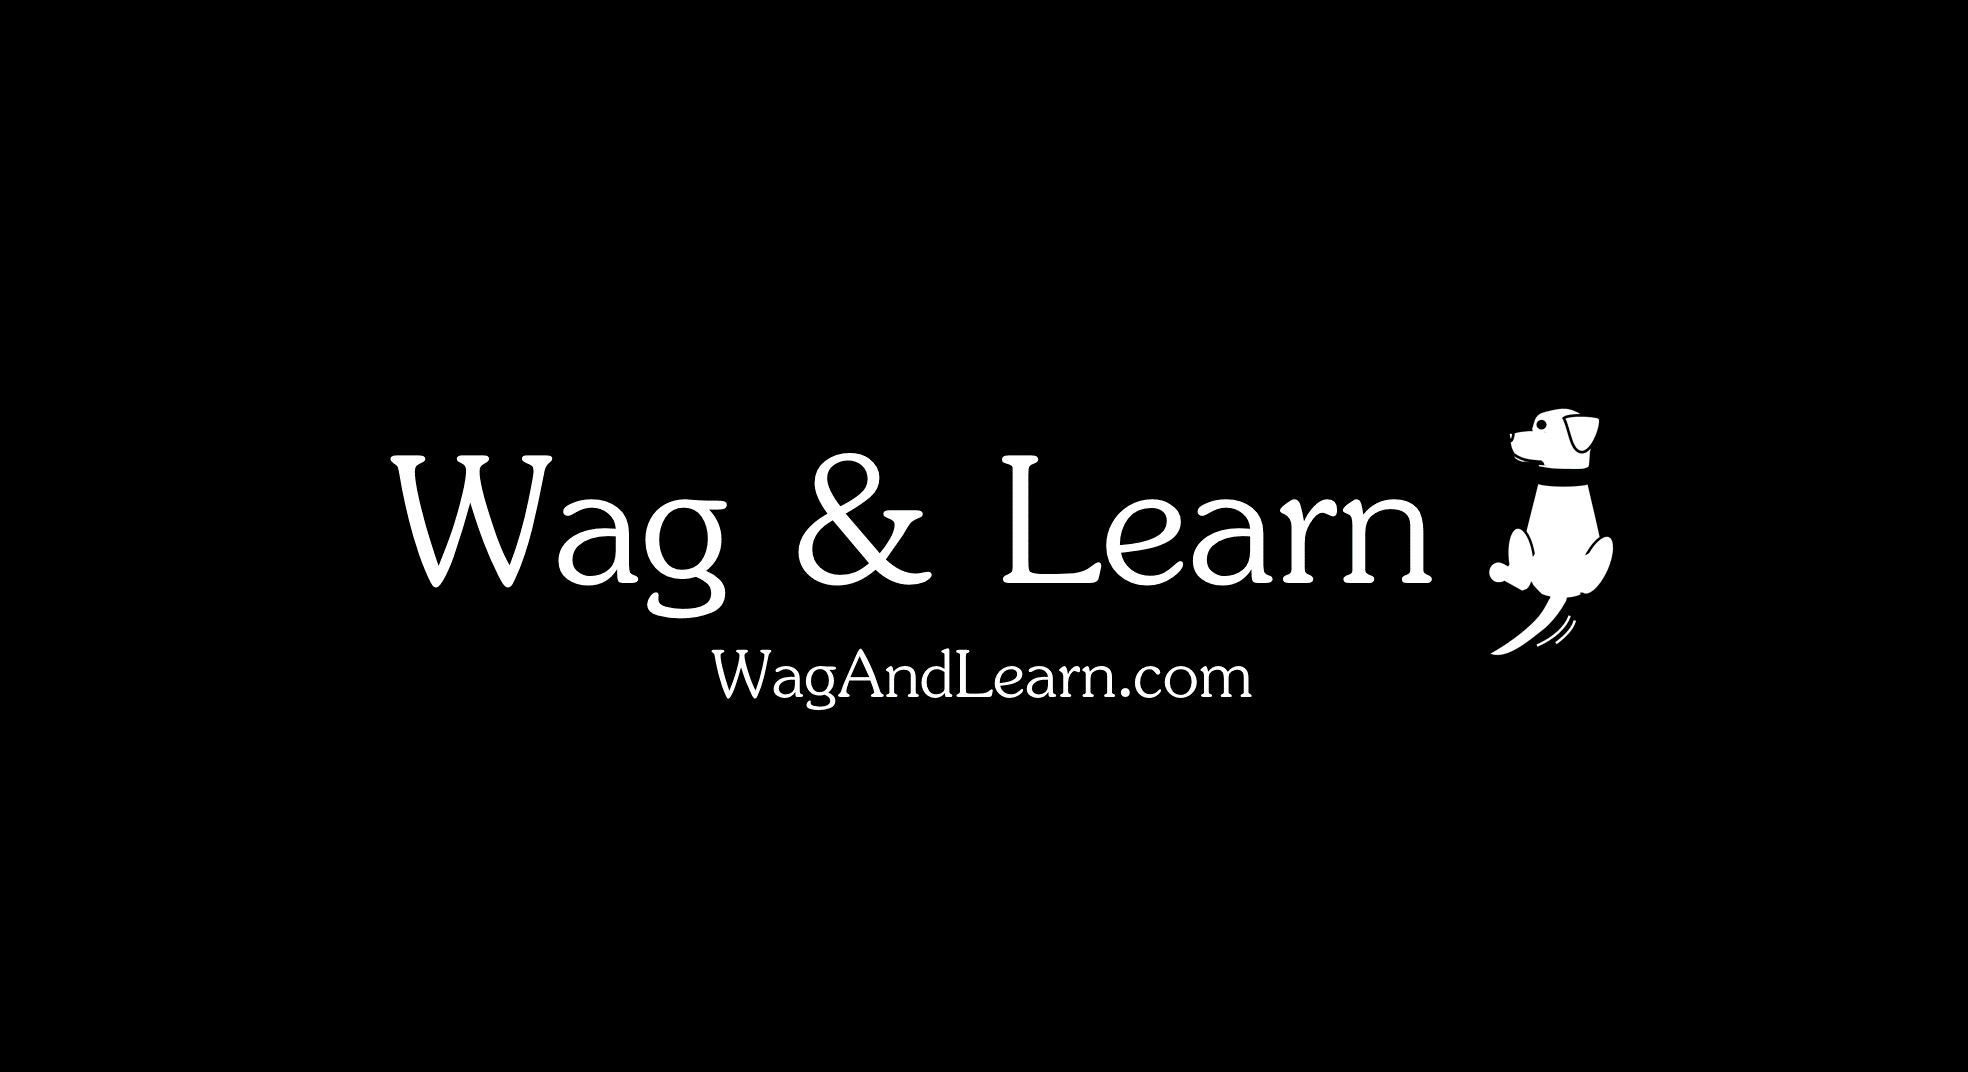 WAG Pet Services